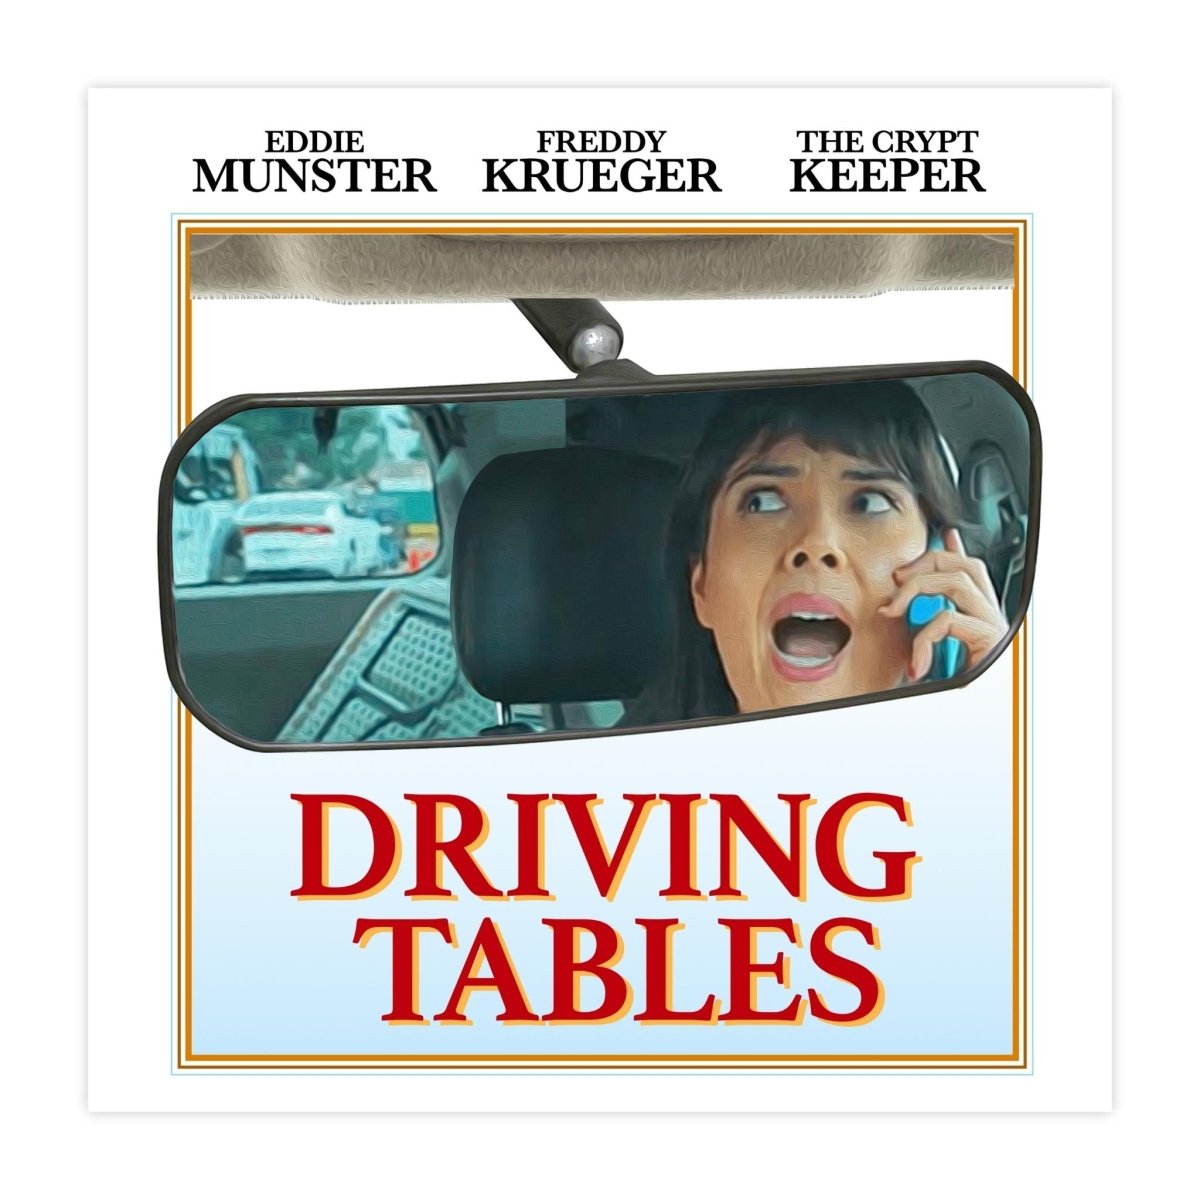 Driving Tables Tim Robinson I Think You Should Leave Sticker - stickerbullDriving Tables Tim Robinson I Think You Should Leave StickerRetail StickerstickerbullstickerbullTaylor_DrivingTablesDriving Tables Tim Robinson I Think You Should Leave Sticker